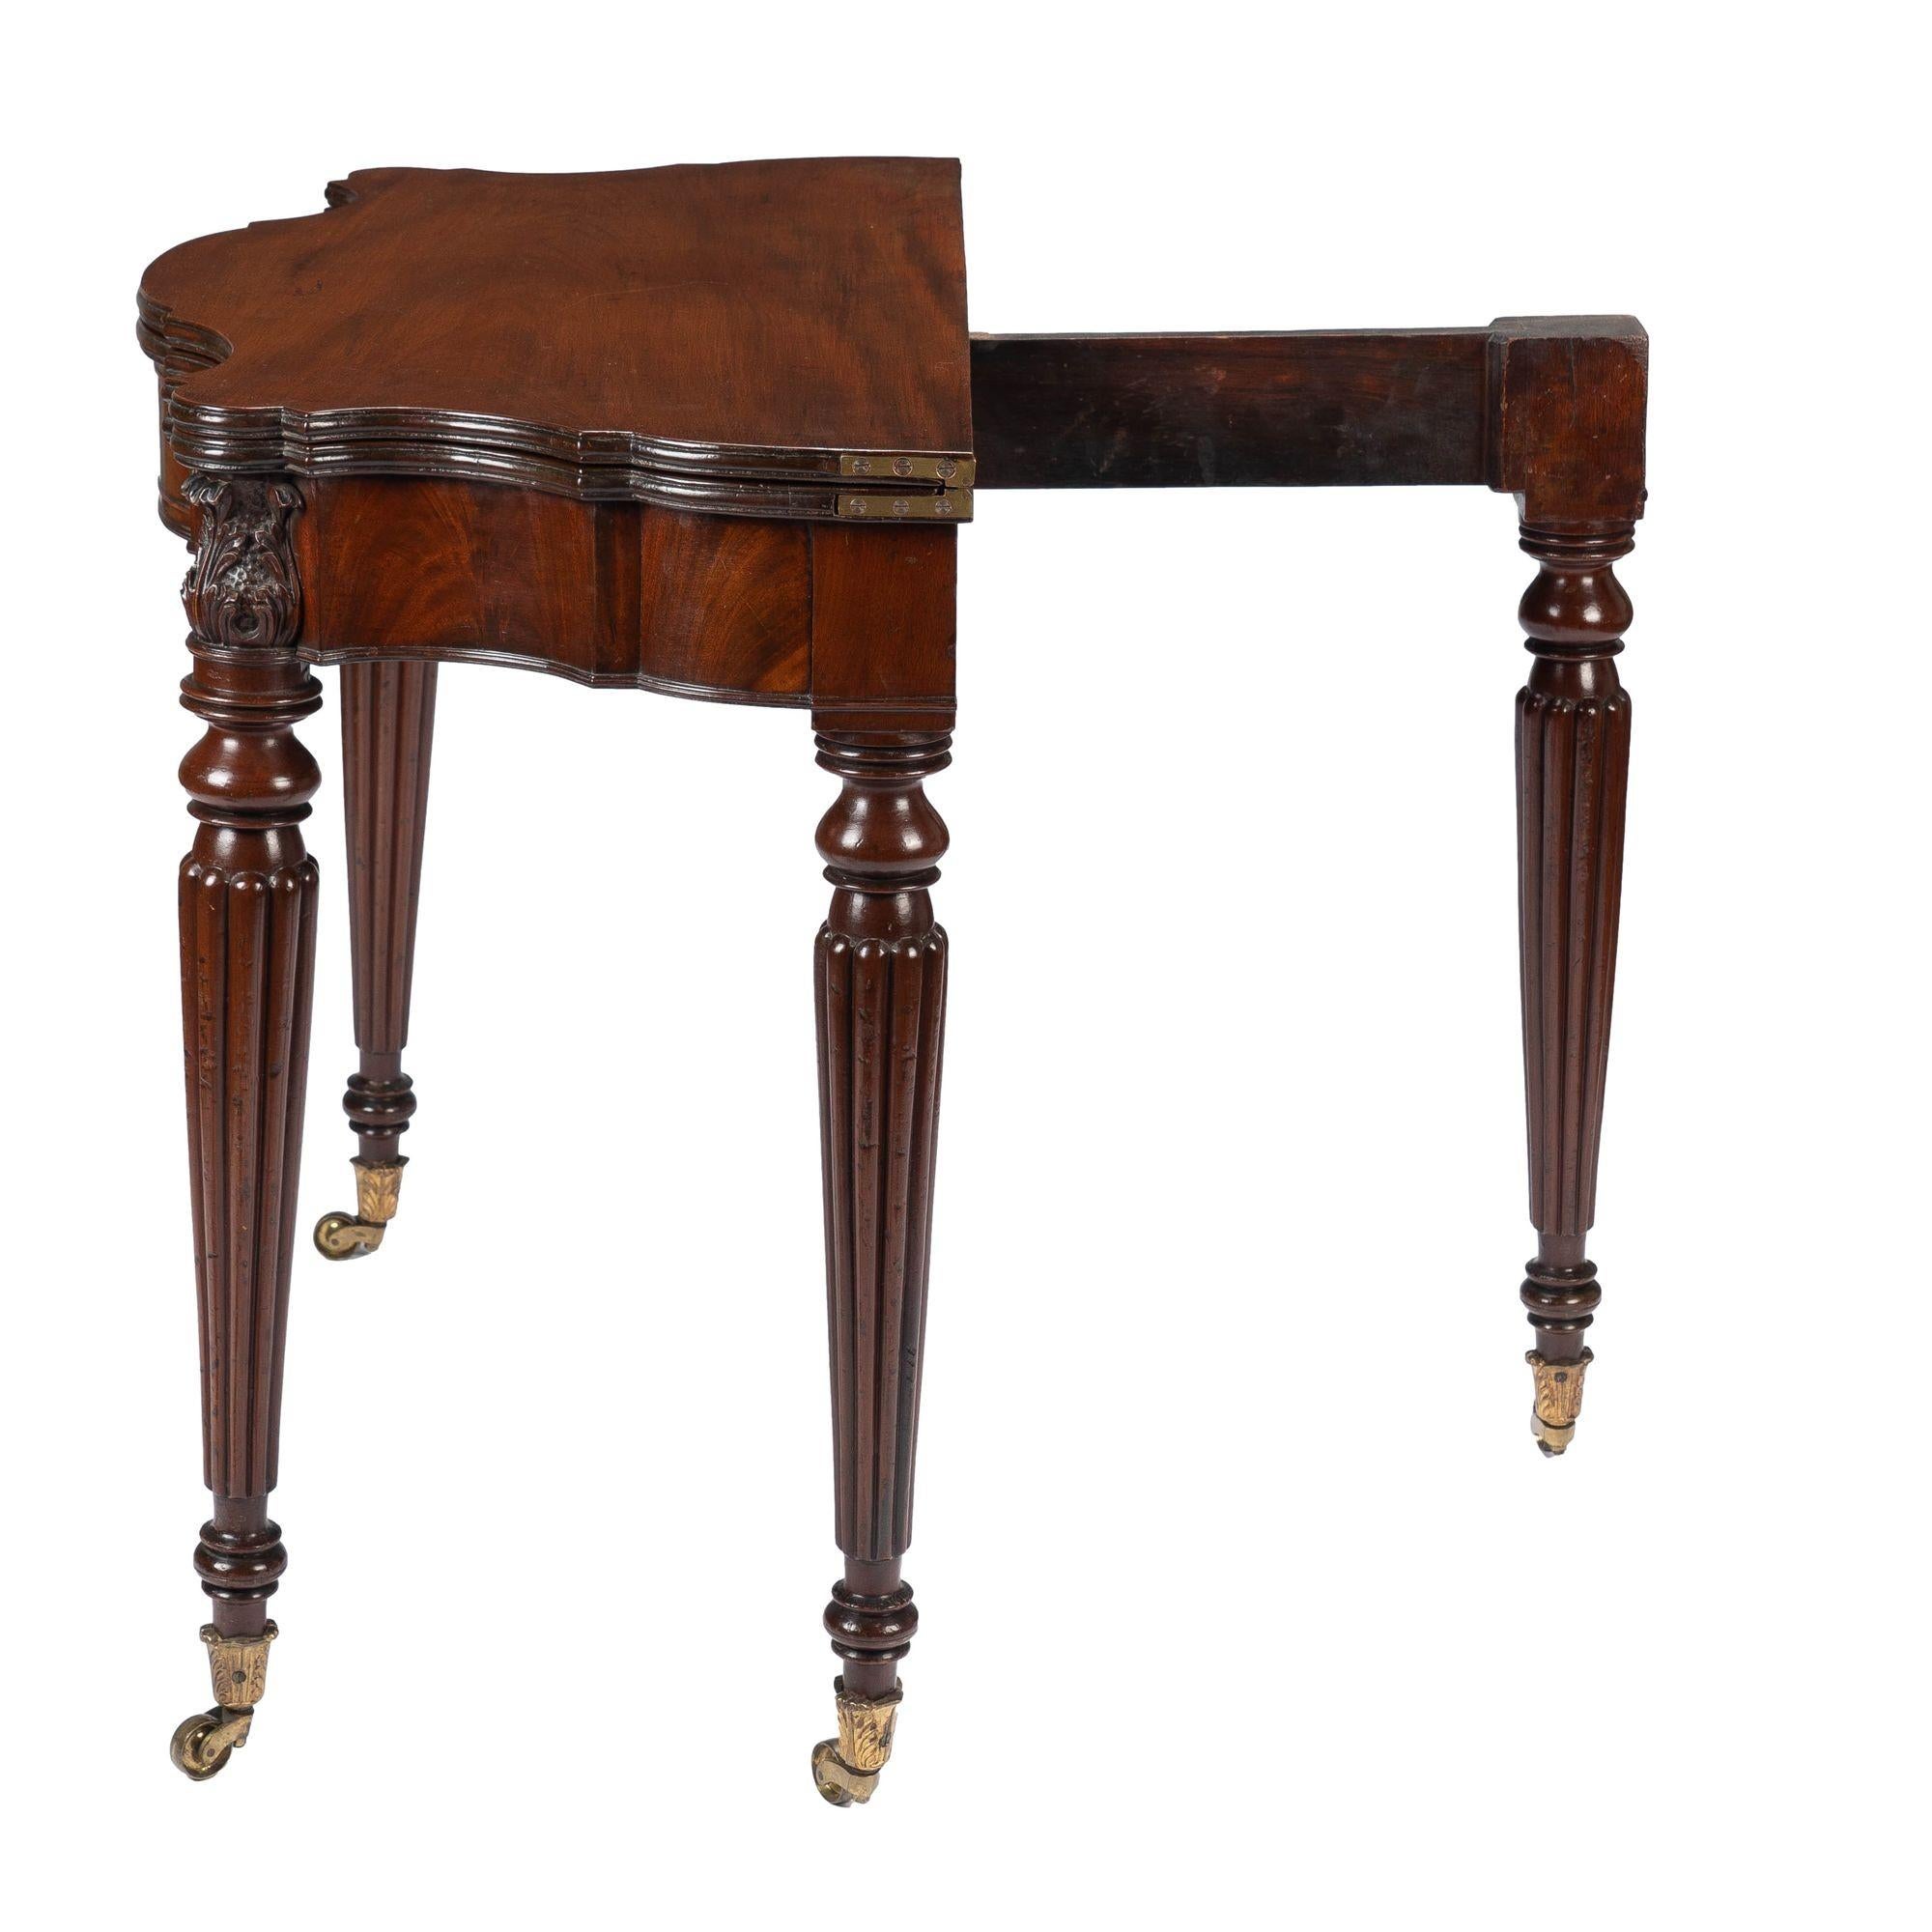 Samuel Field Macintire Attributed Mahogany Flip Top Game Table, c. 1810-15 For Sale 3